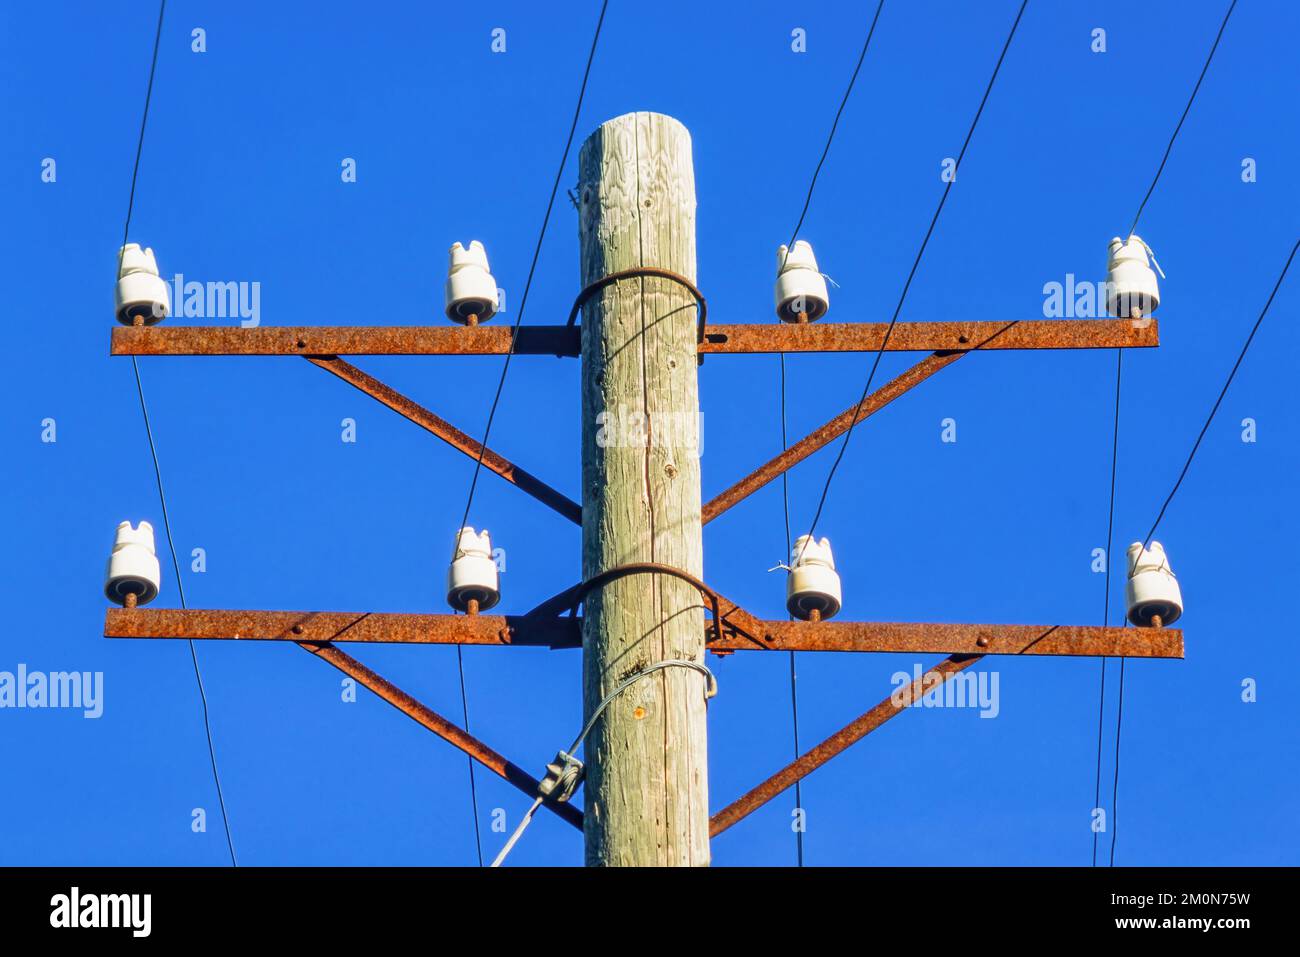 Old telephone poles with wires Stock Photo